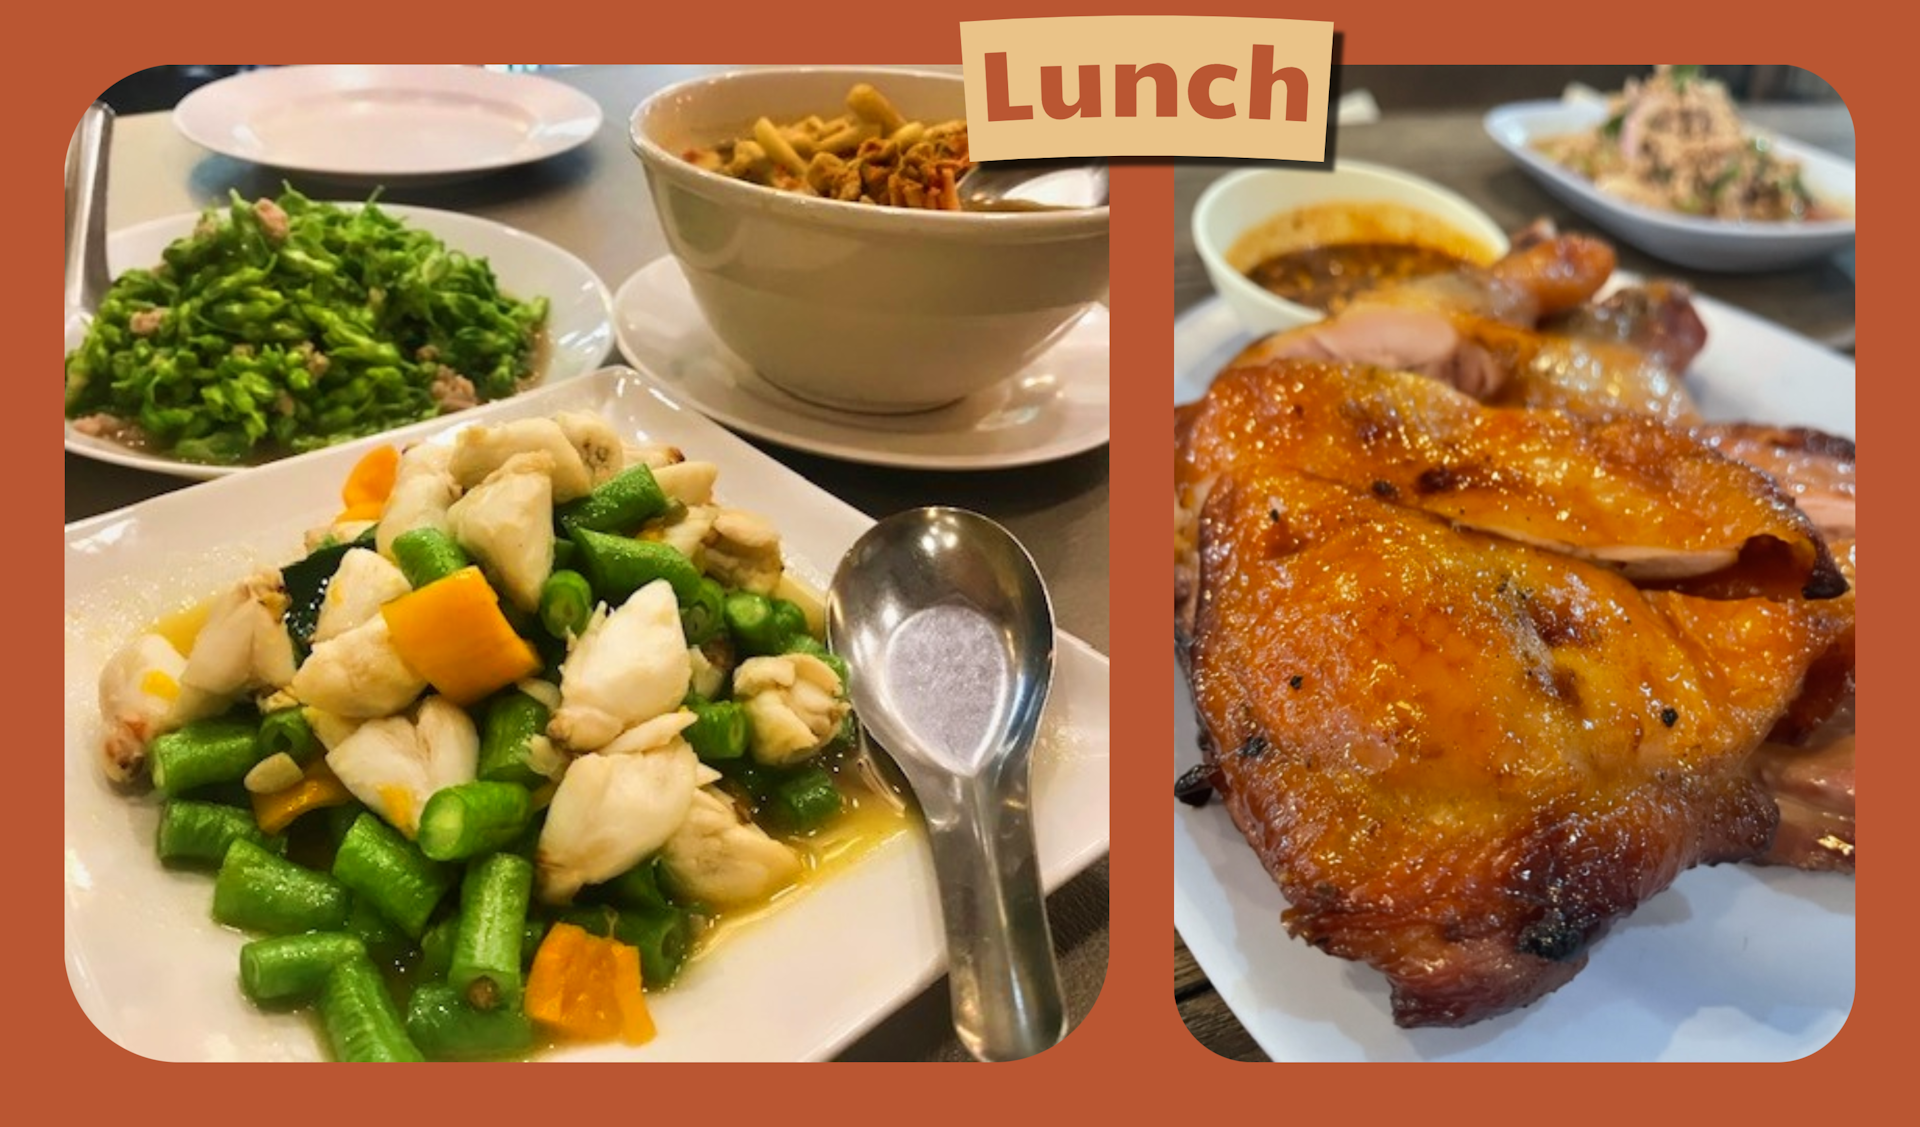 L: Plate of crabmeat with green beans. R: close-up of fried chicken with crispy skin